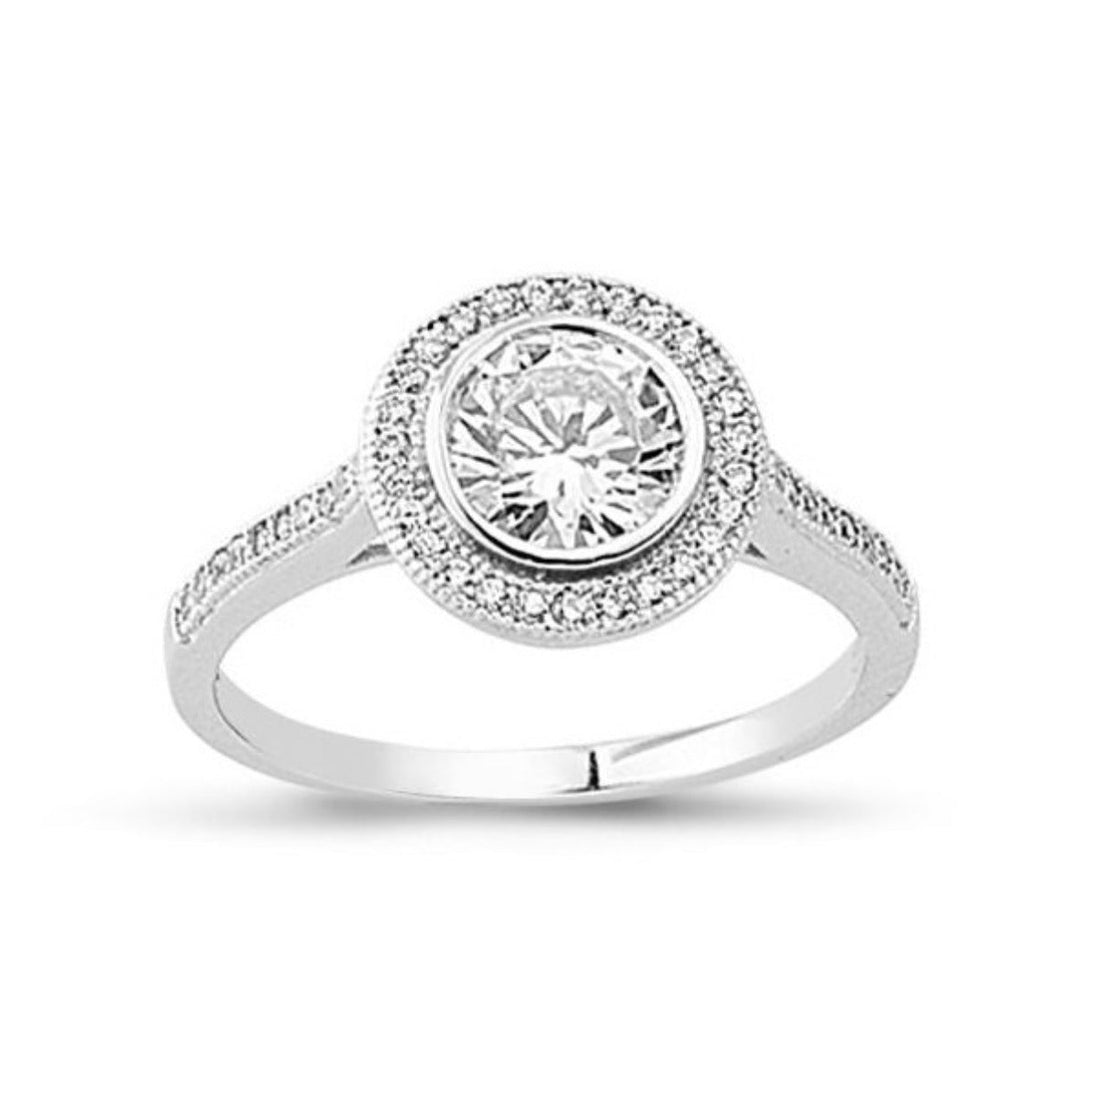 Classic Rub Over Cubic Zirconia Halo Ring in Rhodium Plated Silver